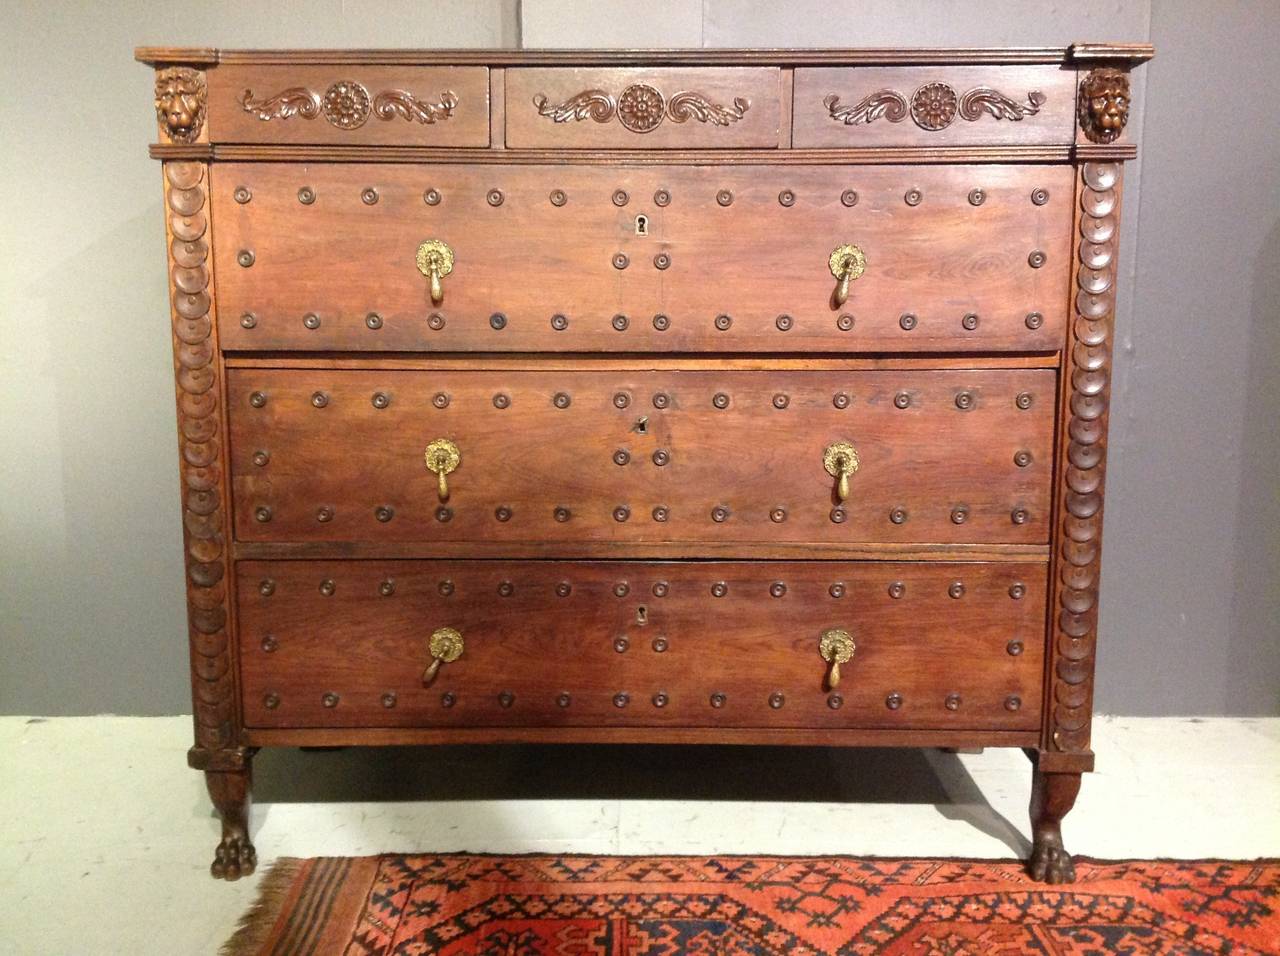 Unusual English Rosewood Chest of Drawers In Good Condition For Sale In Sleepy Hollow, NY